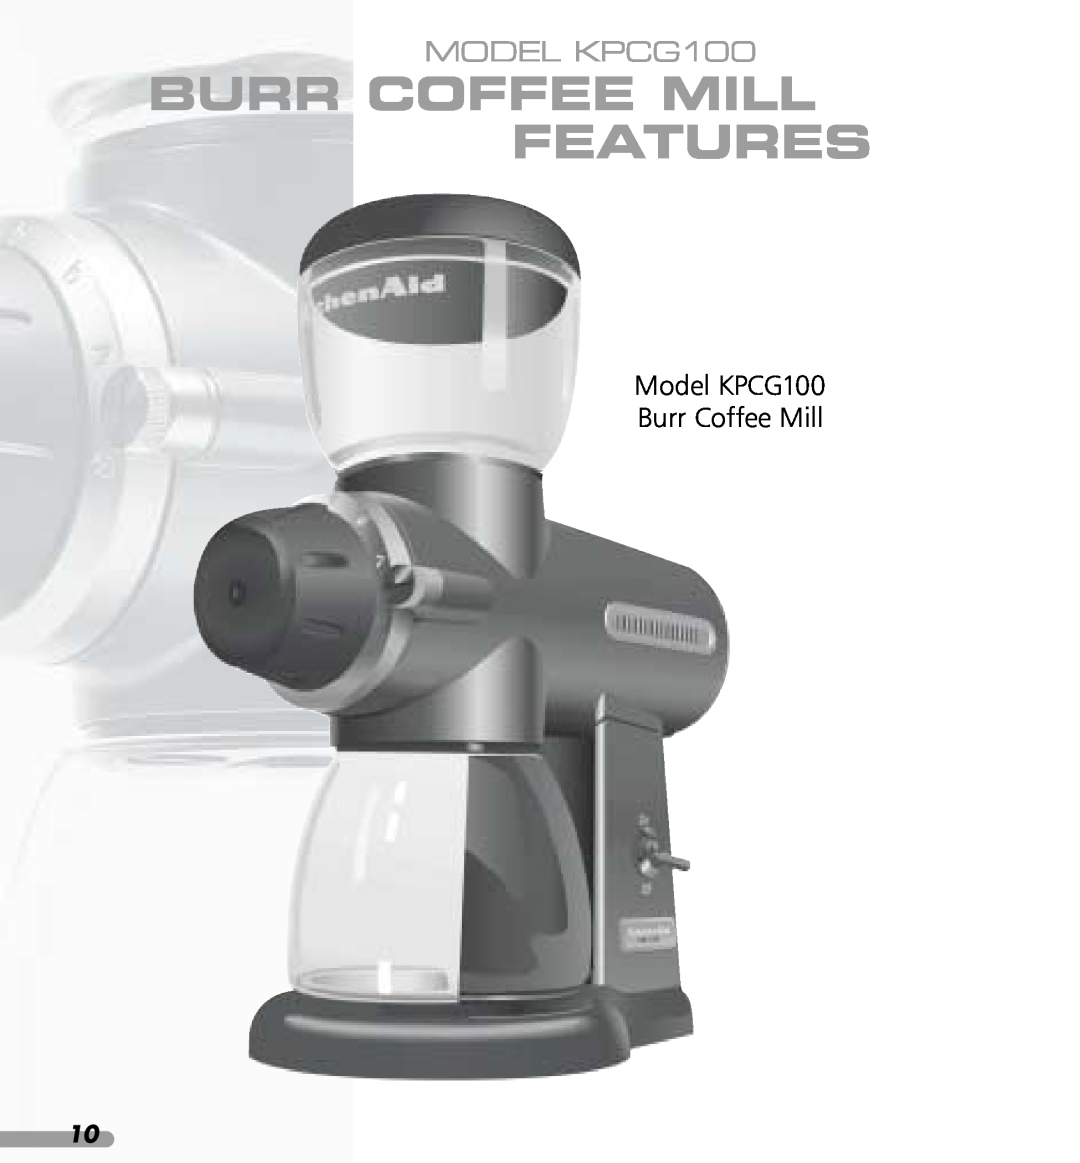 KitchenAid manual Burr Coffee Mill Features, MODEL KPCG100, Model KPCG100 Burr Coffee Mill 